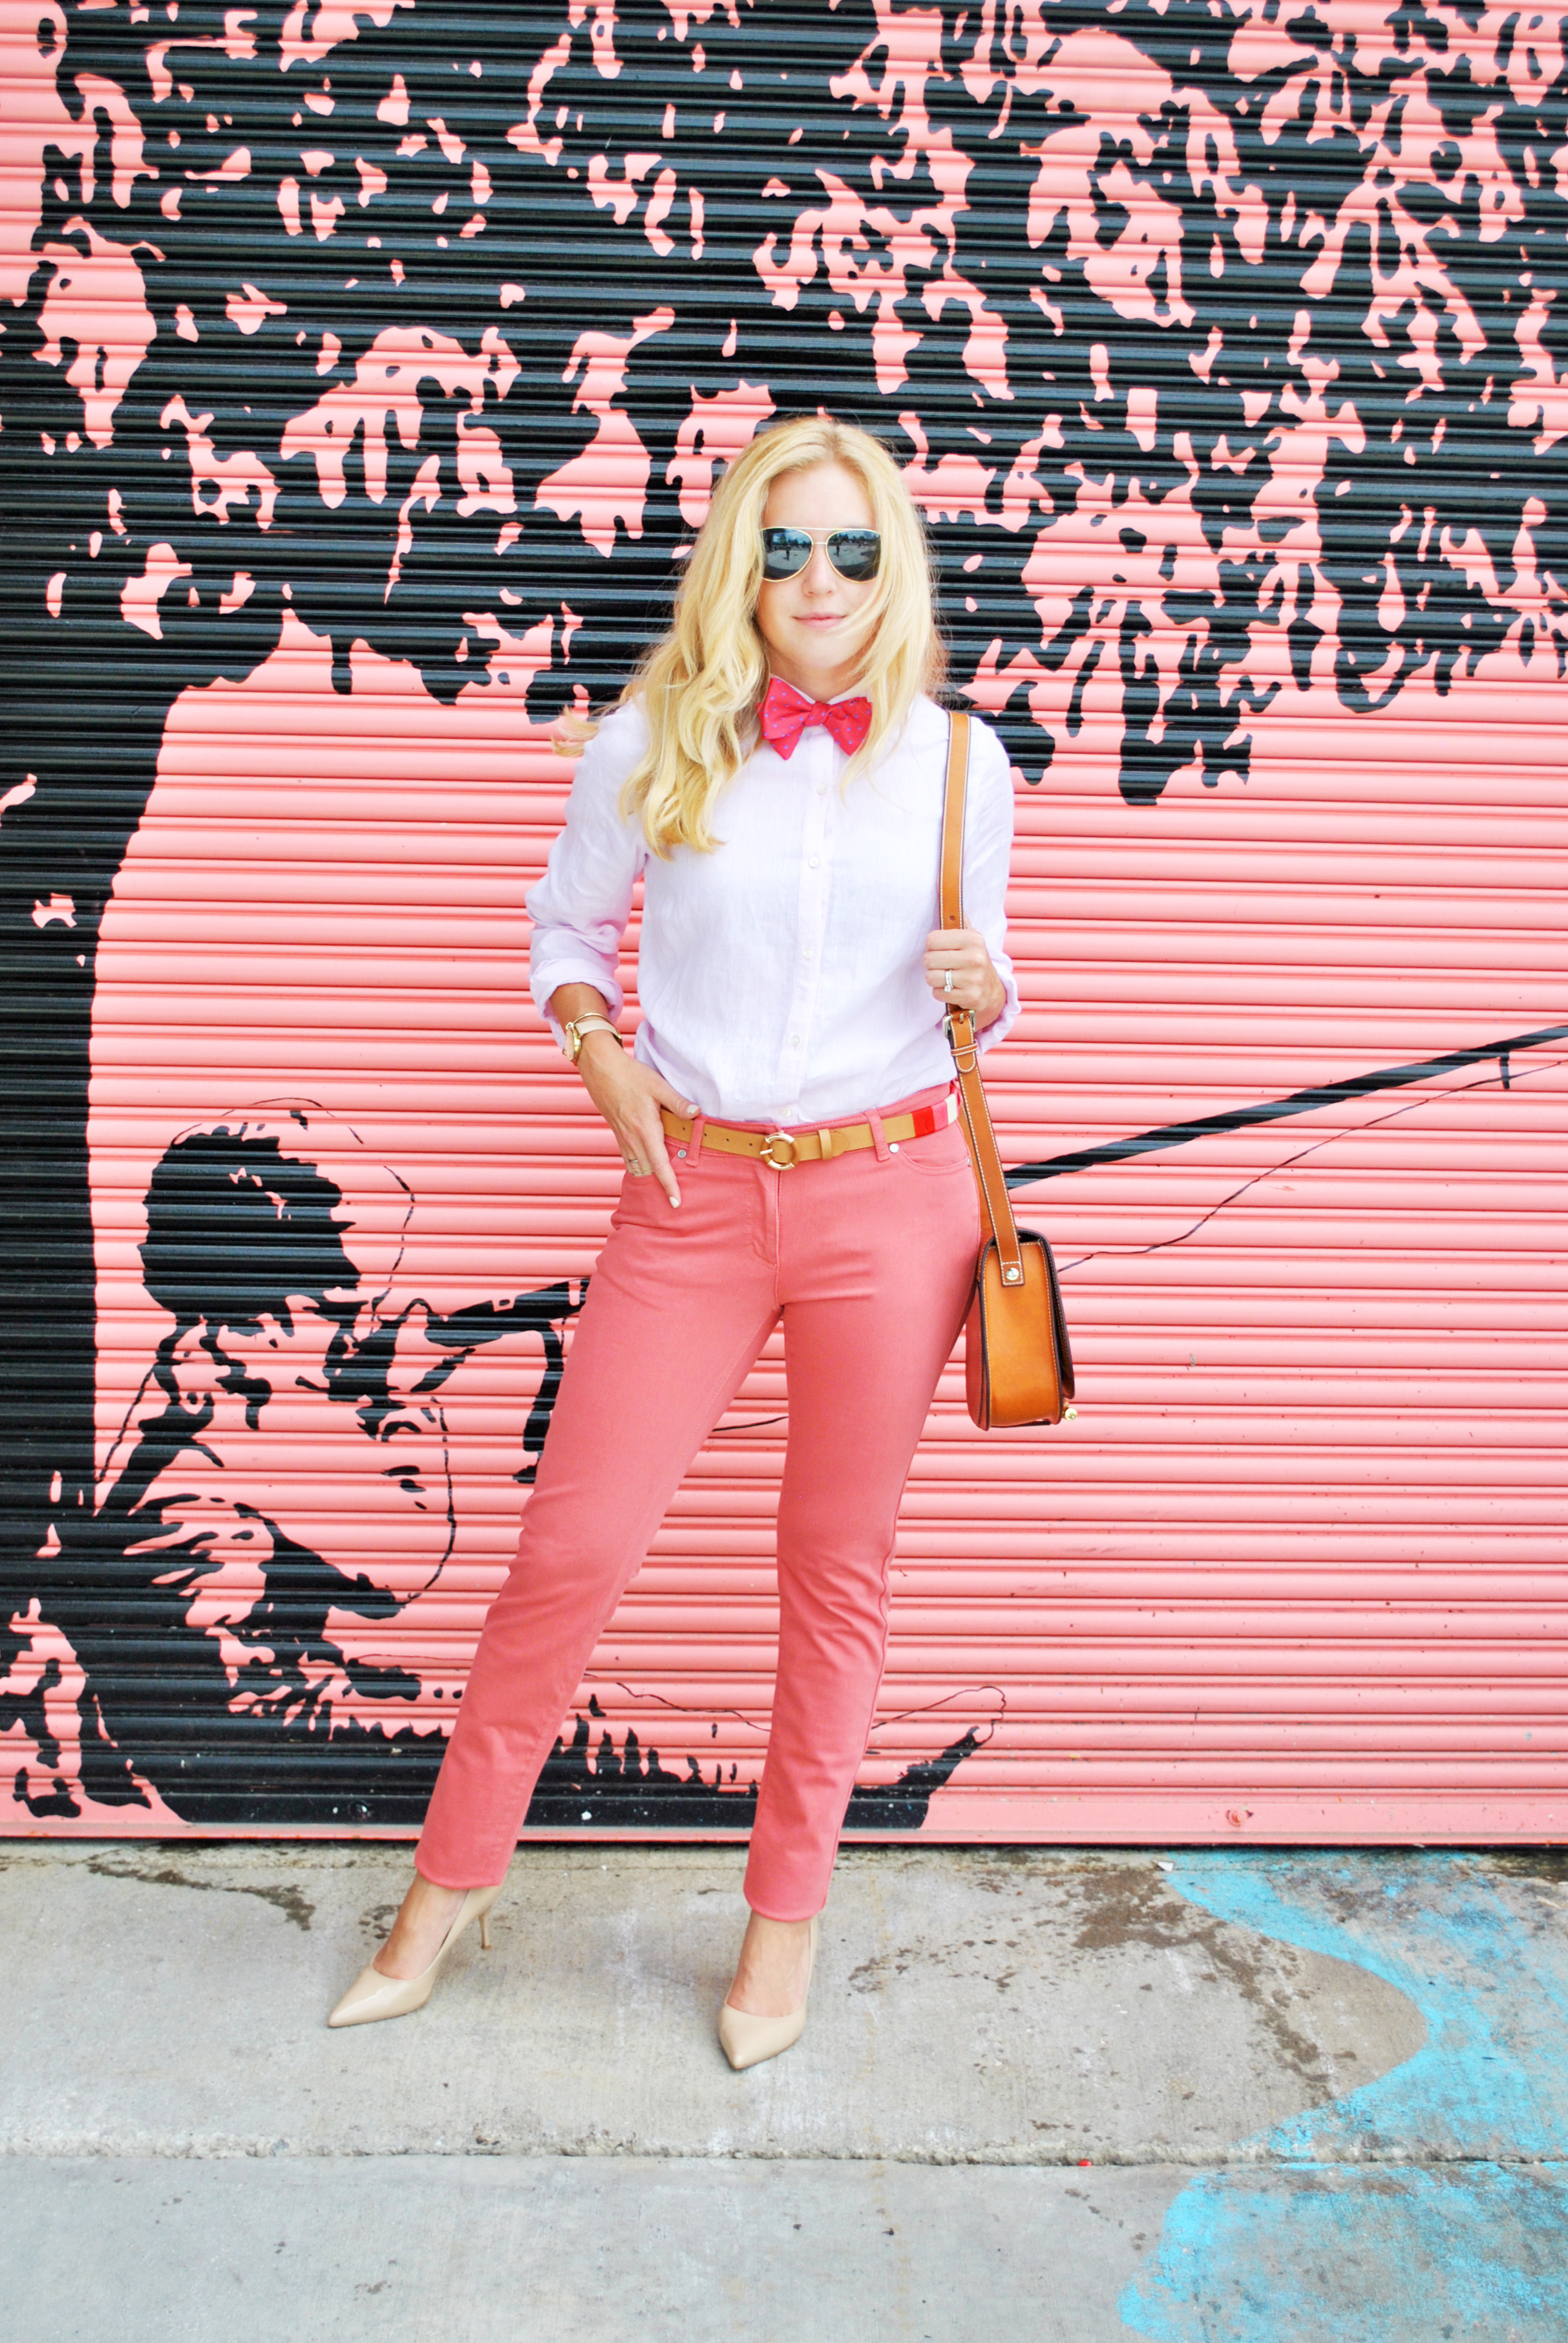 thoughtfulwish | preppy // school outfit // pink outfit // peach outfit // bowtie // j. mclaughlin // blonde fashion // fashion blogger // boston prep // boston fashion // new england fashion